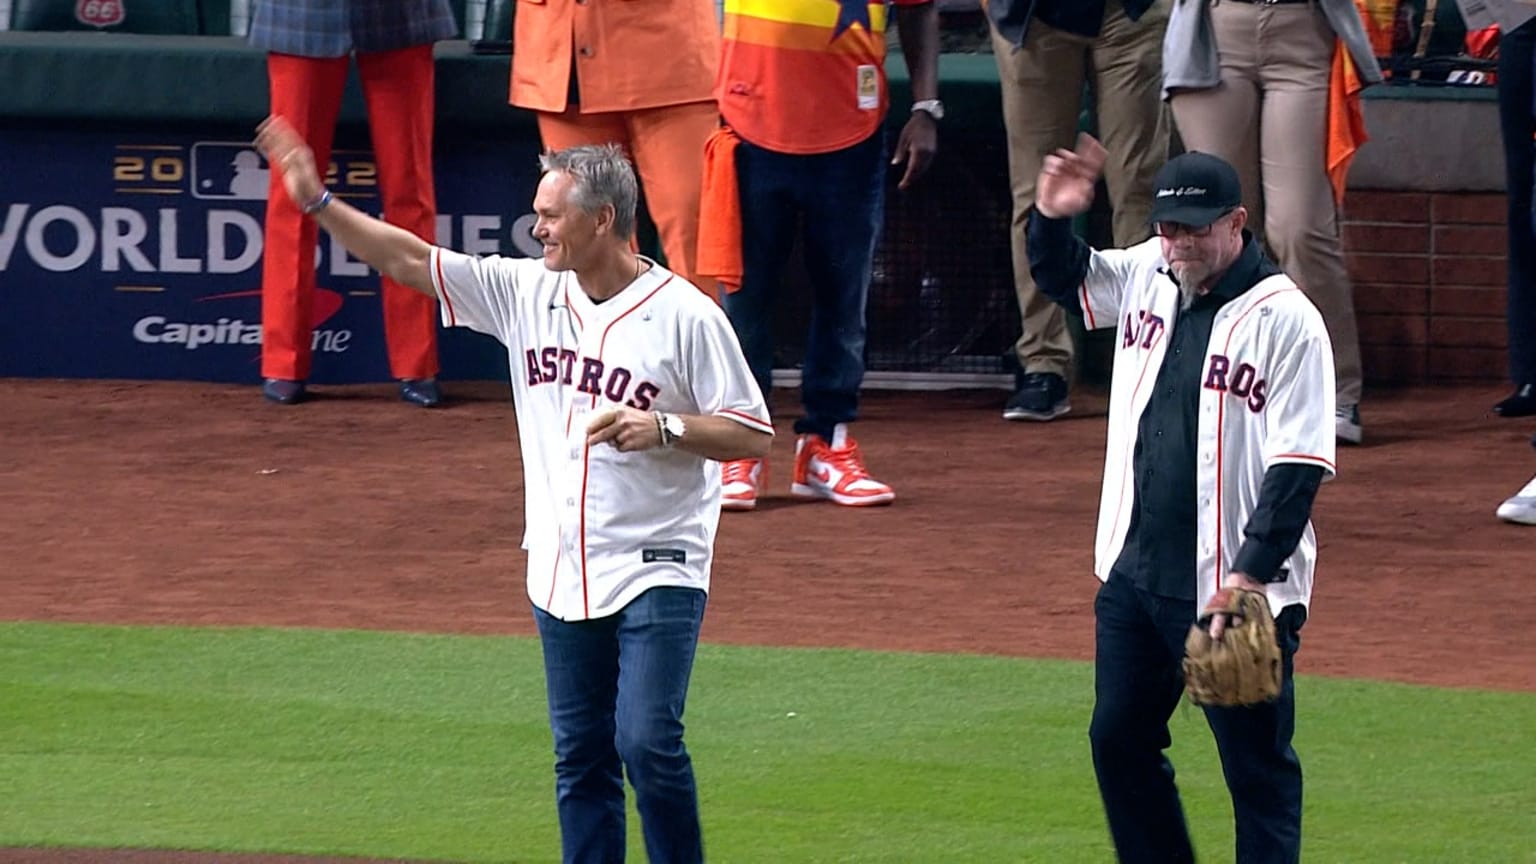 Biggio throws 1st pitch to Bagwell, 10/29/2022